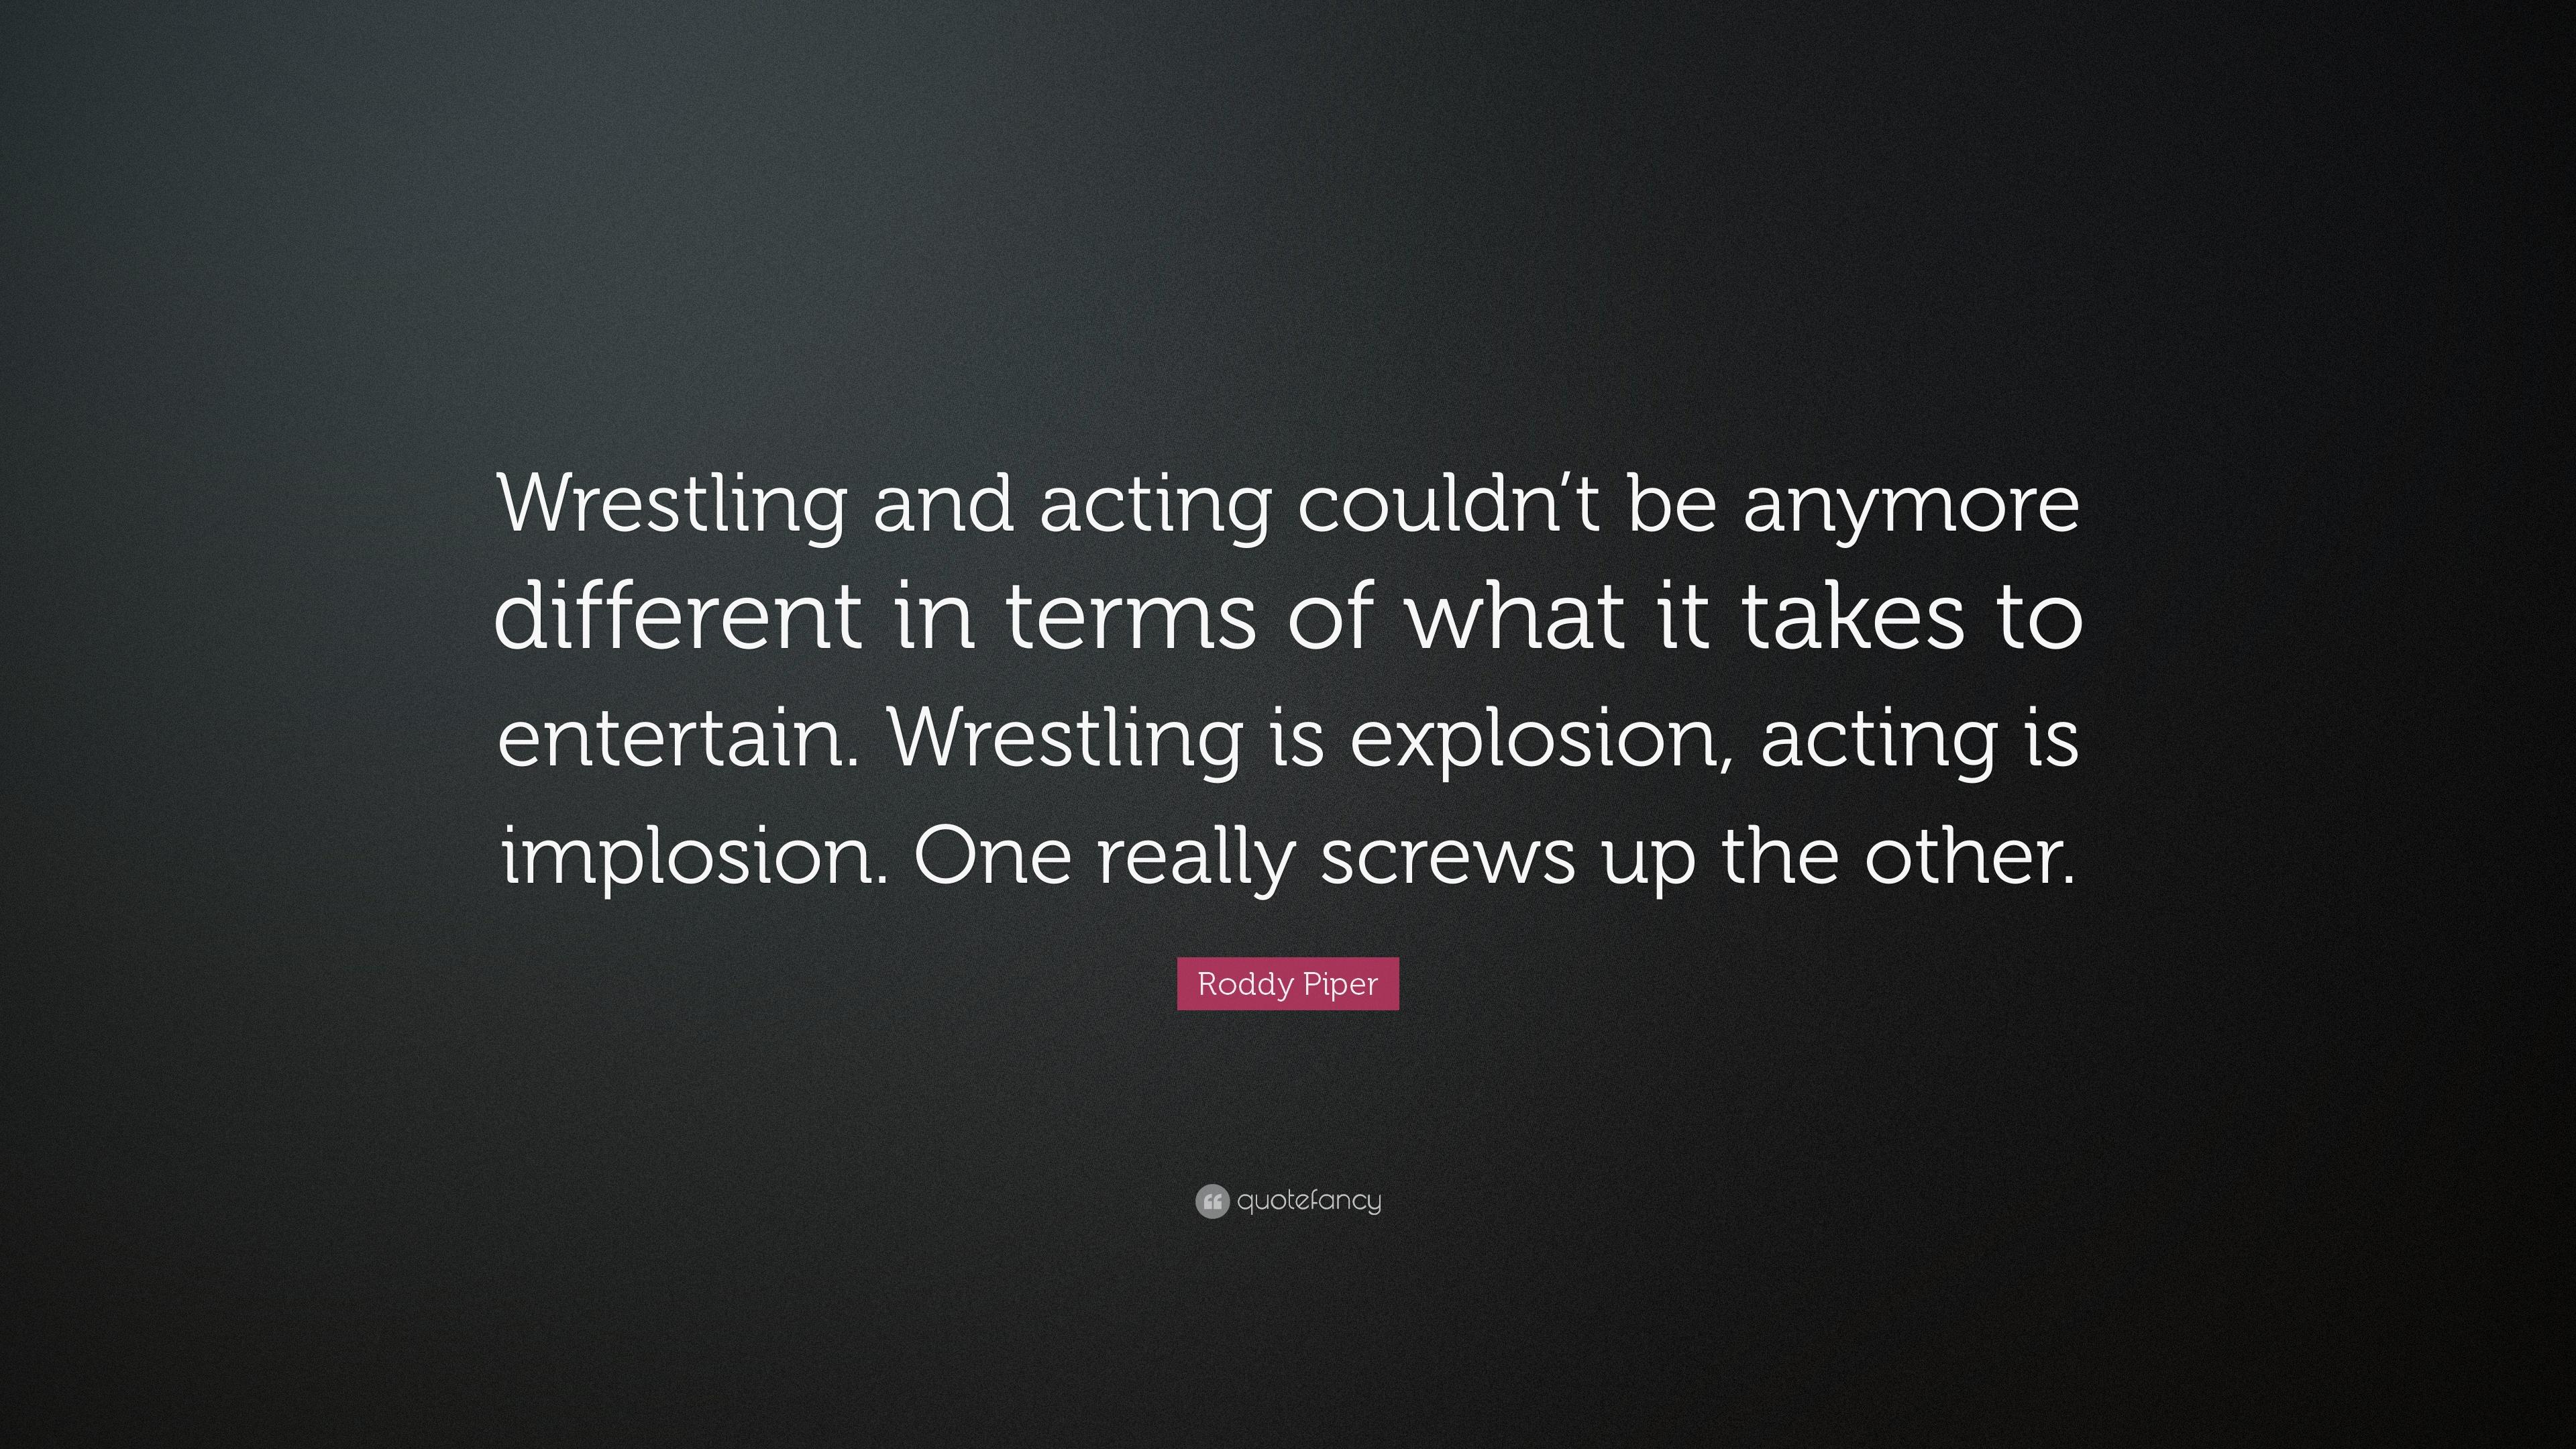 Roddy Piper Quote: “Wrestling and acting couldn't be anymore